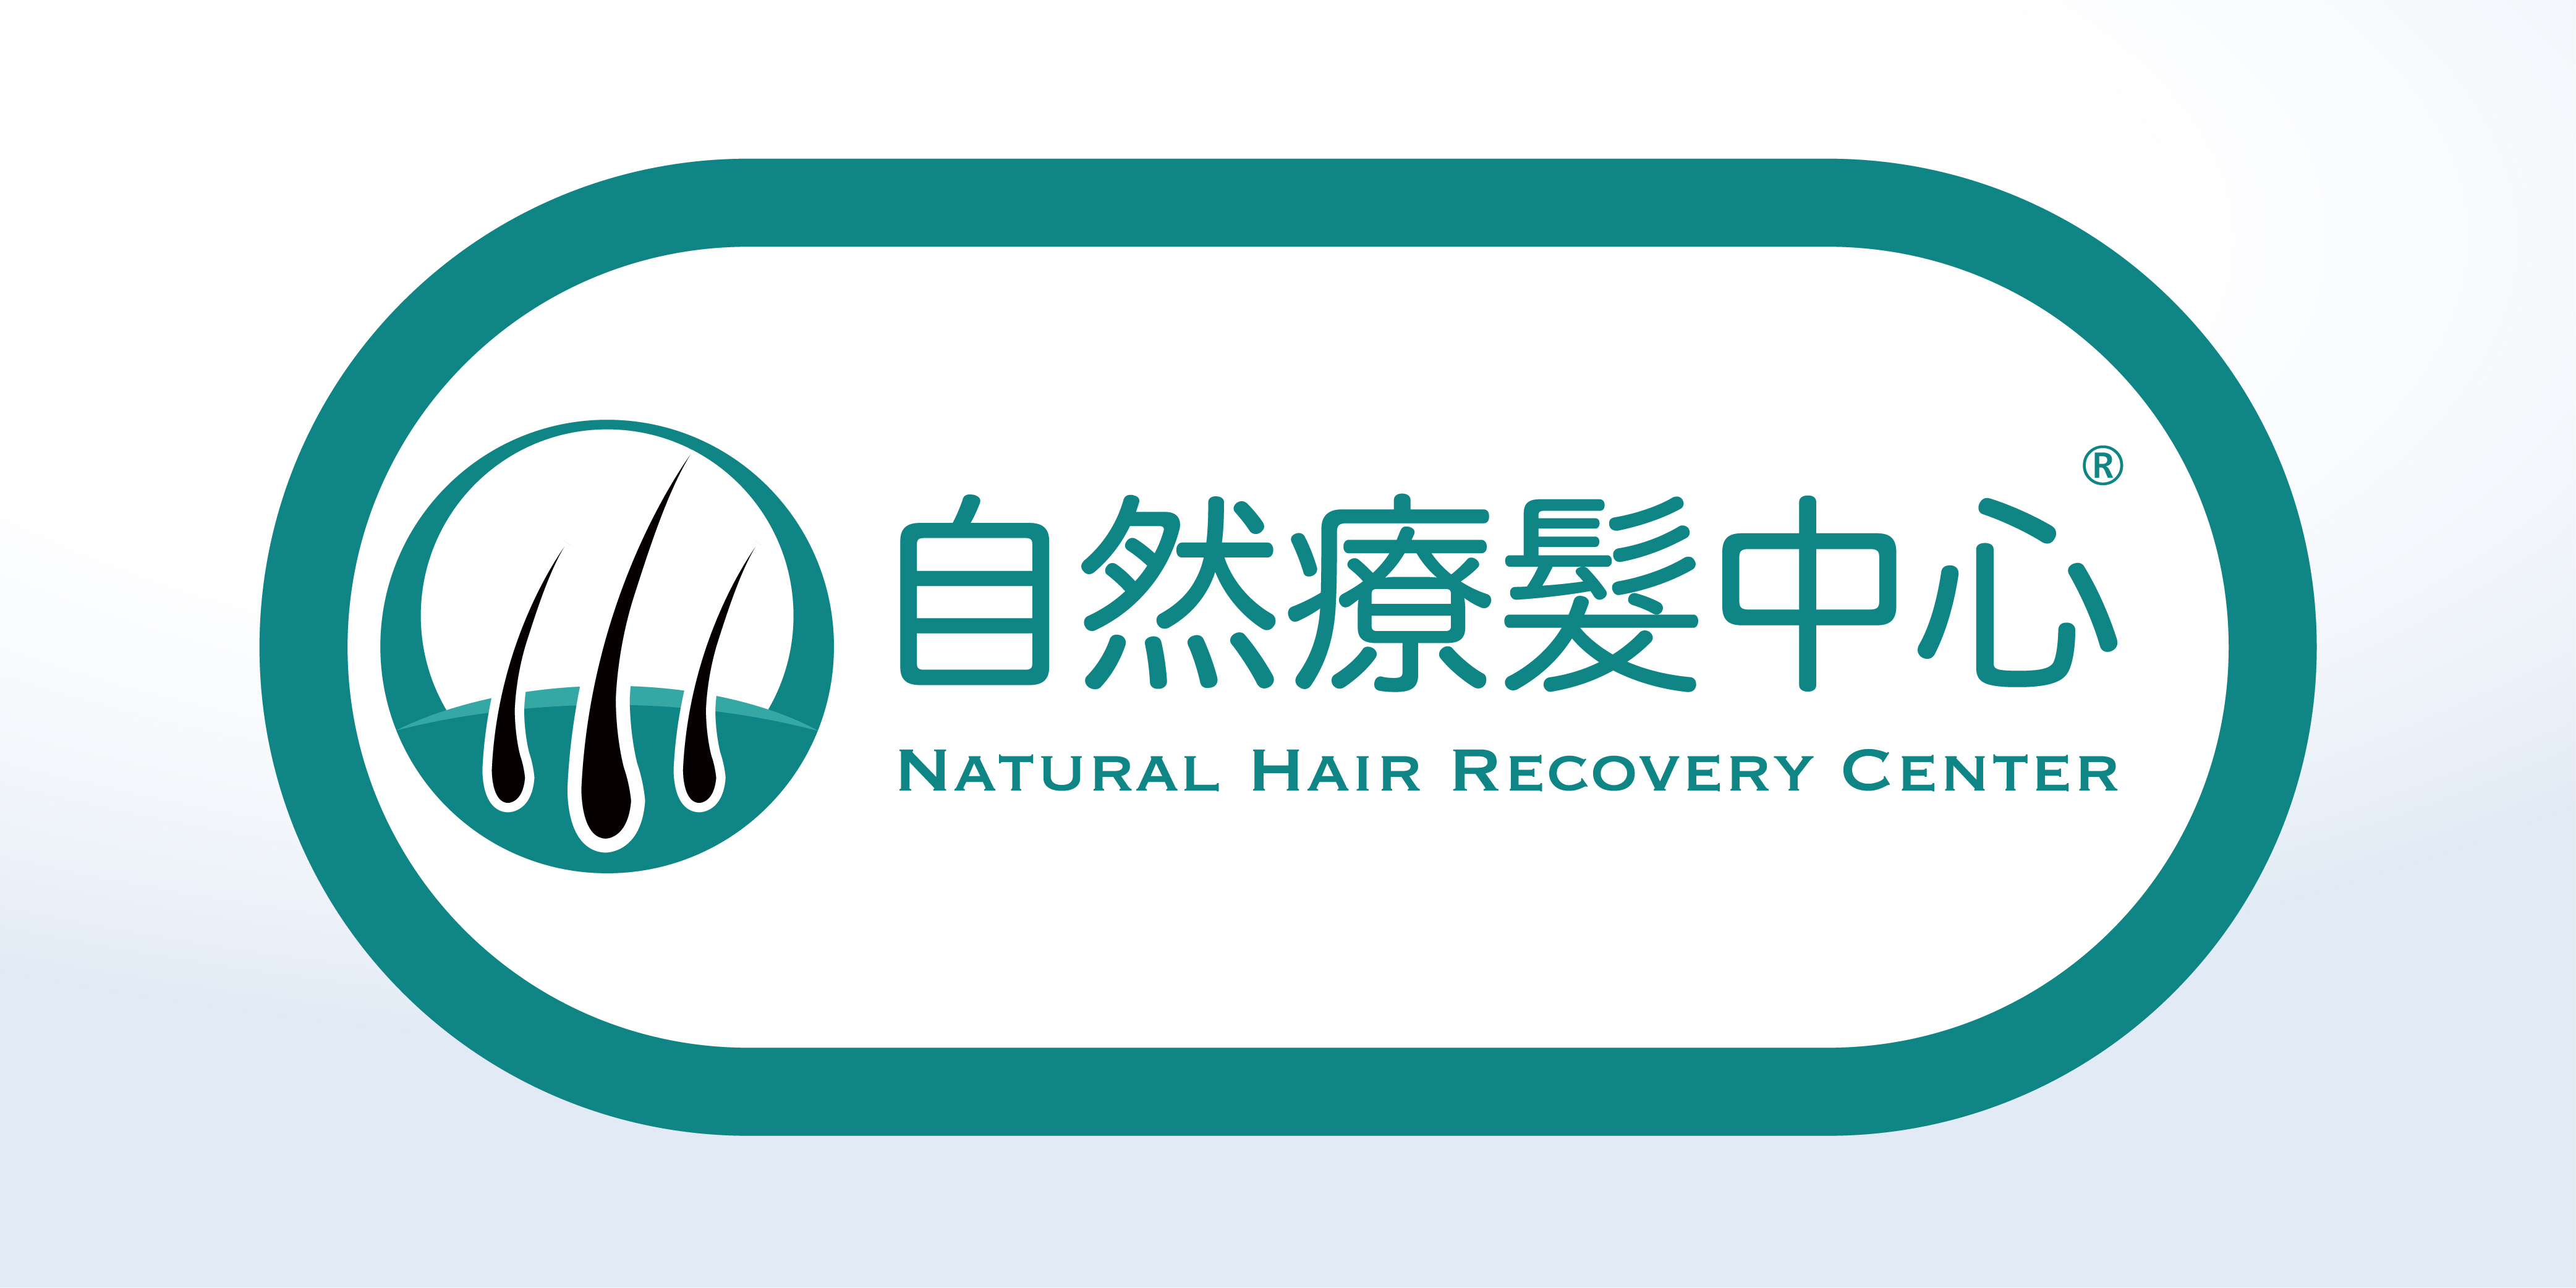 Hair Transplant: 自然療髮中心 Natural Hair Recovery Center ®